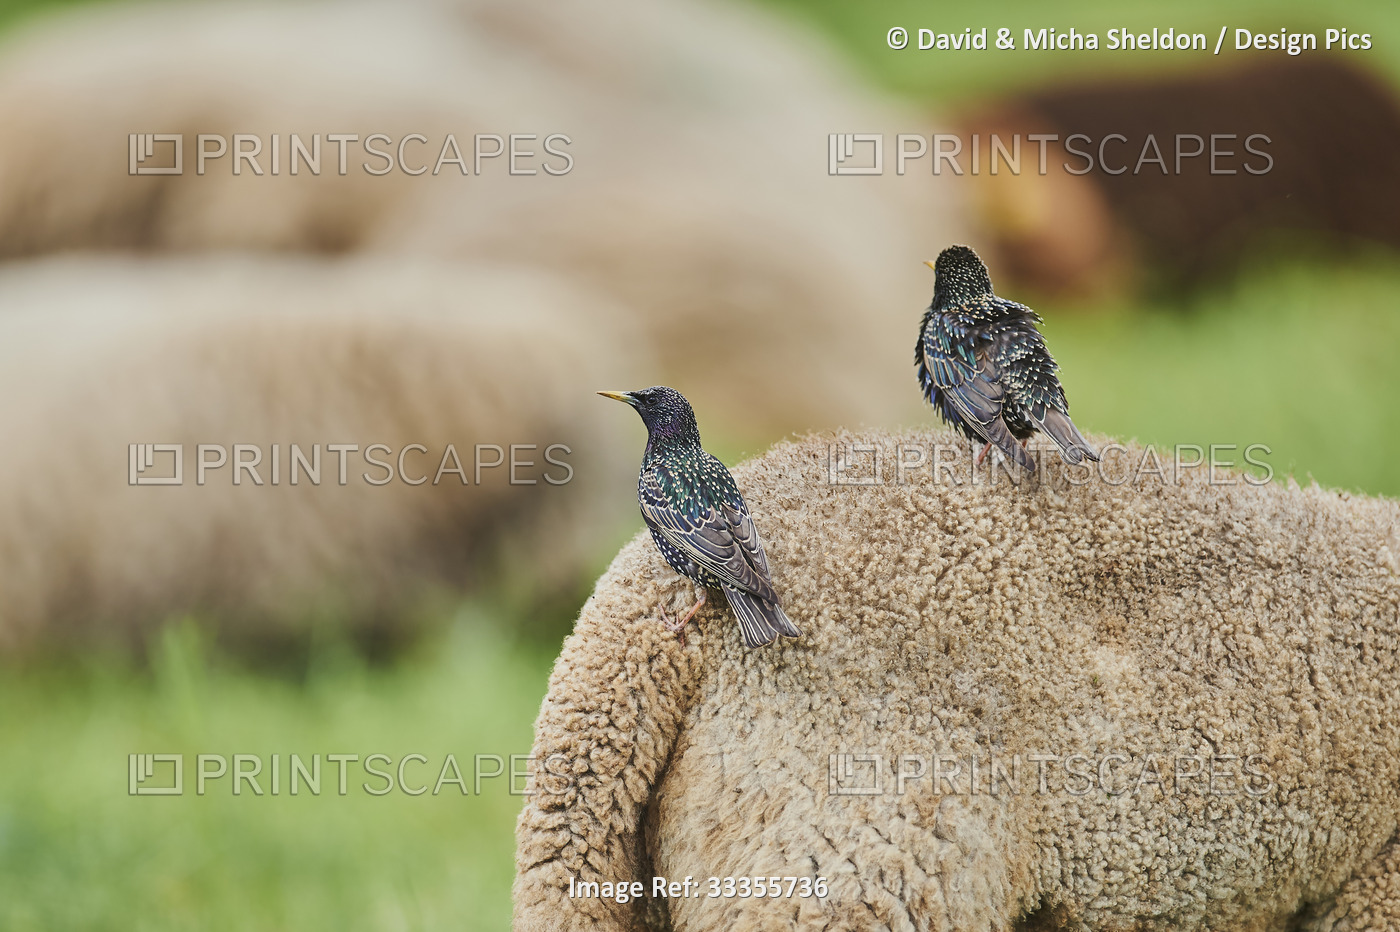 View taken from behind of two common starlings (Sturnus vulgaris) sitting on a ...